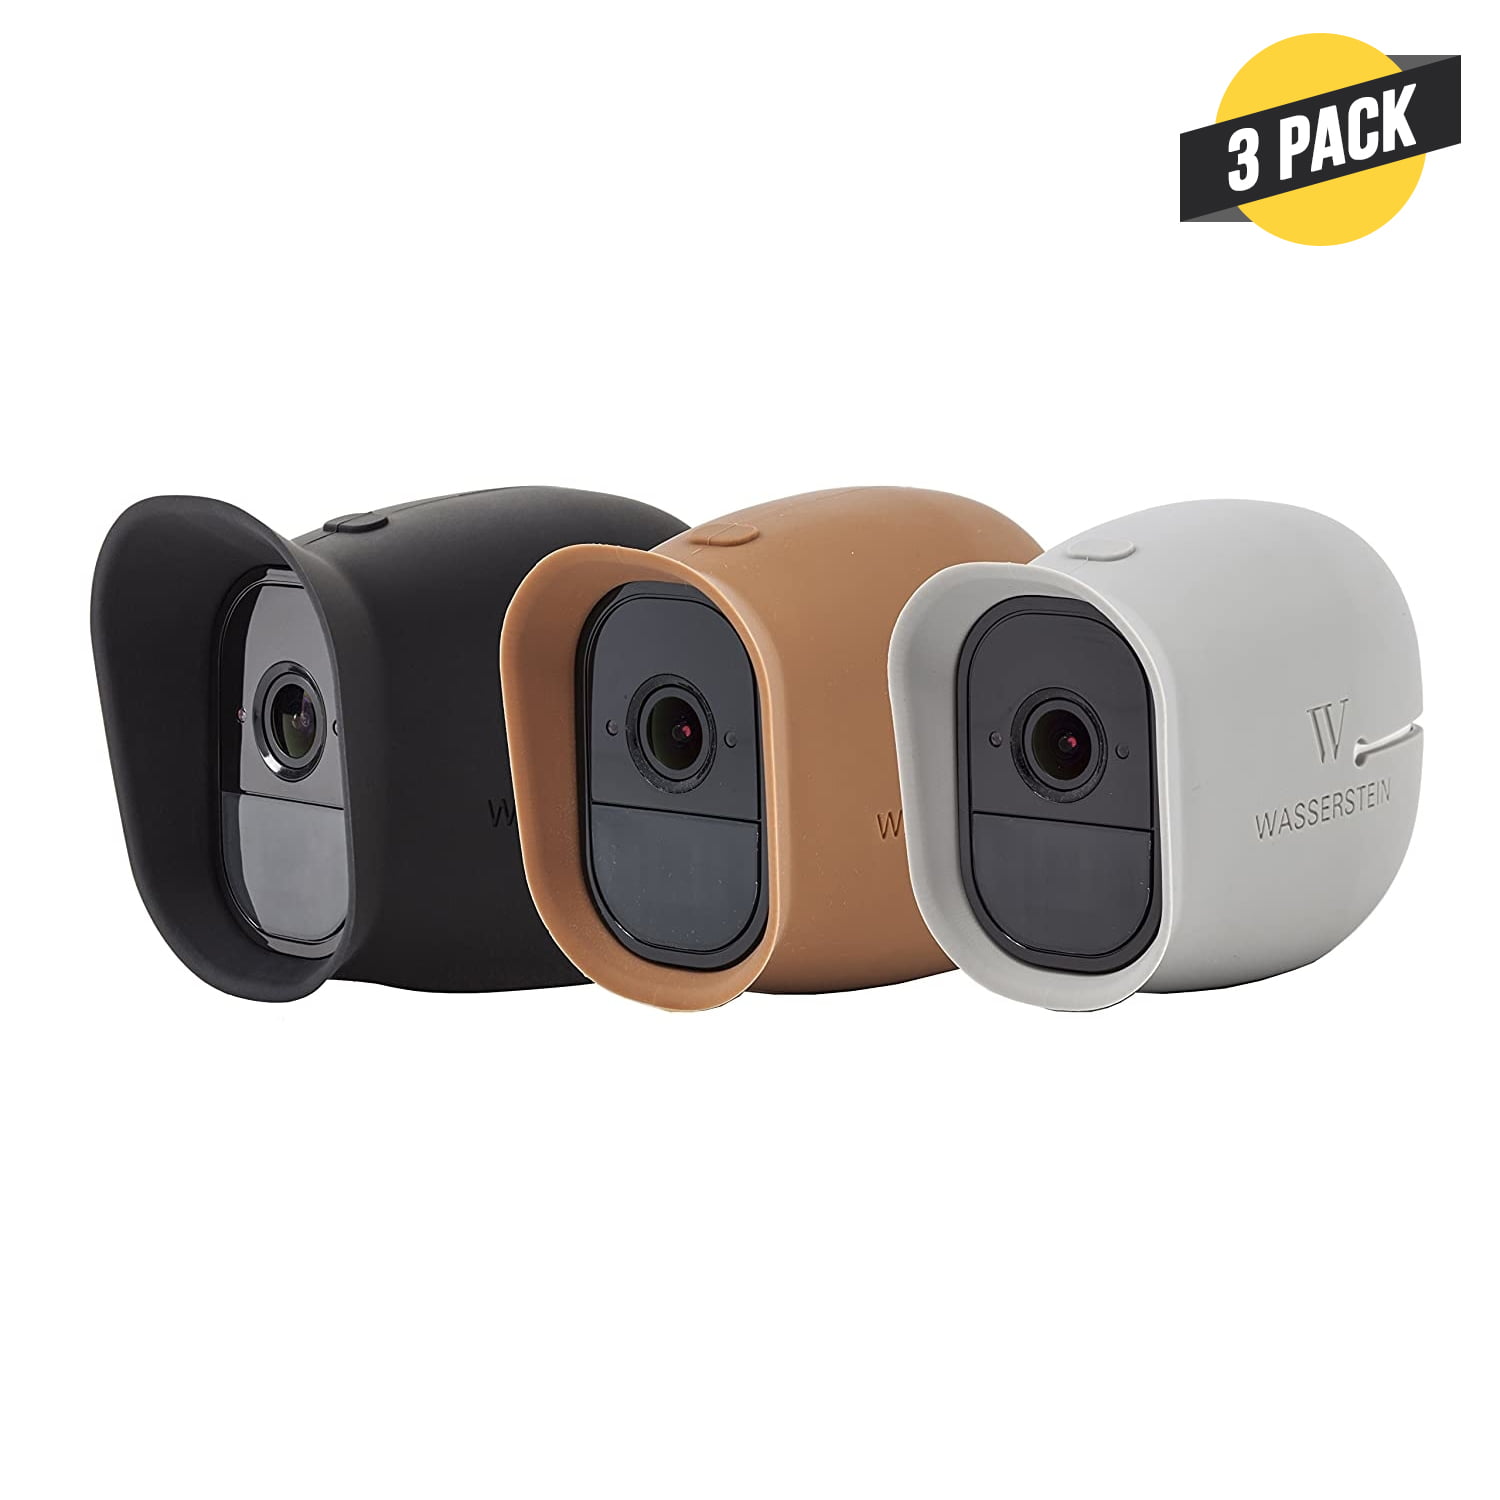 Wasserstein Silicone Skins with Sunroof Compatible with Arlo Pro & Arlo Pro Smart Security Cameras (3 Pack, Black/Brown/Grey) - Walmart.com